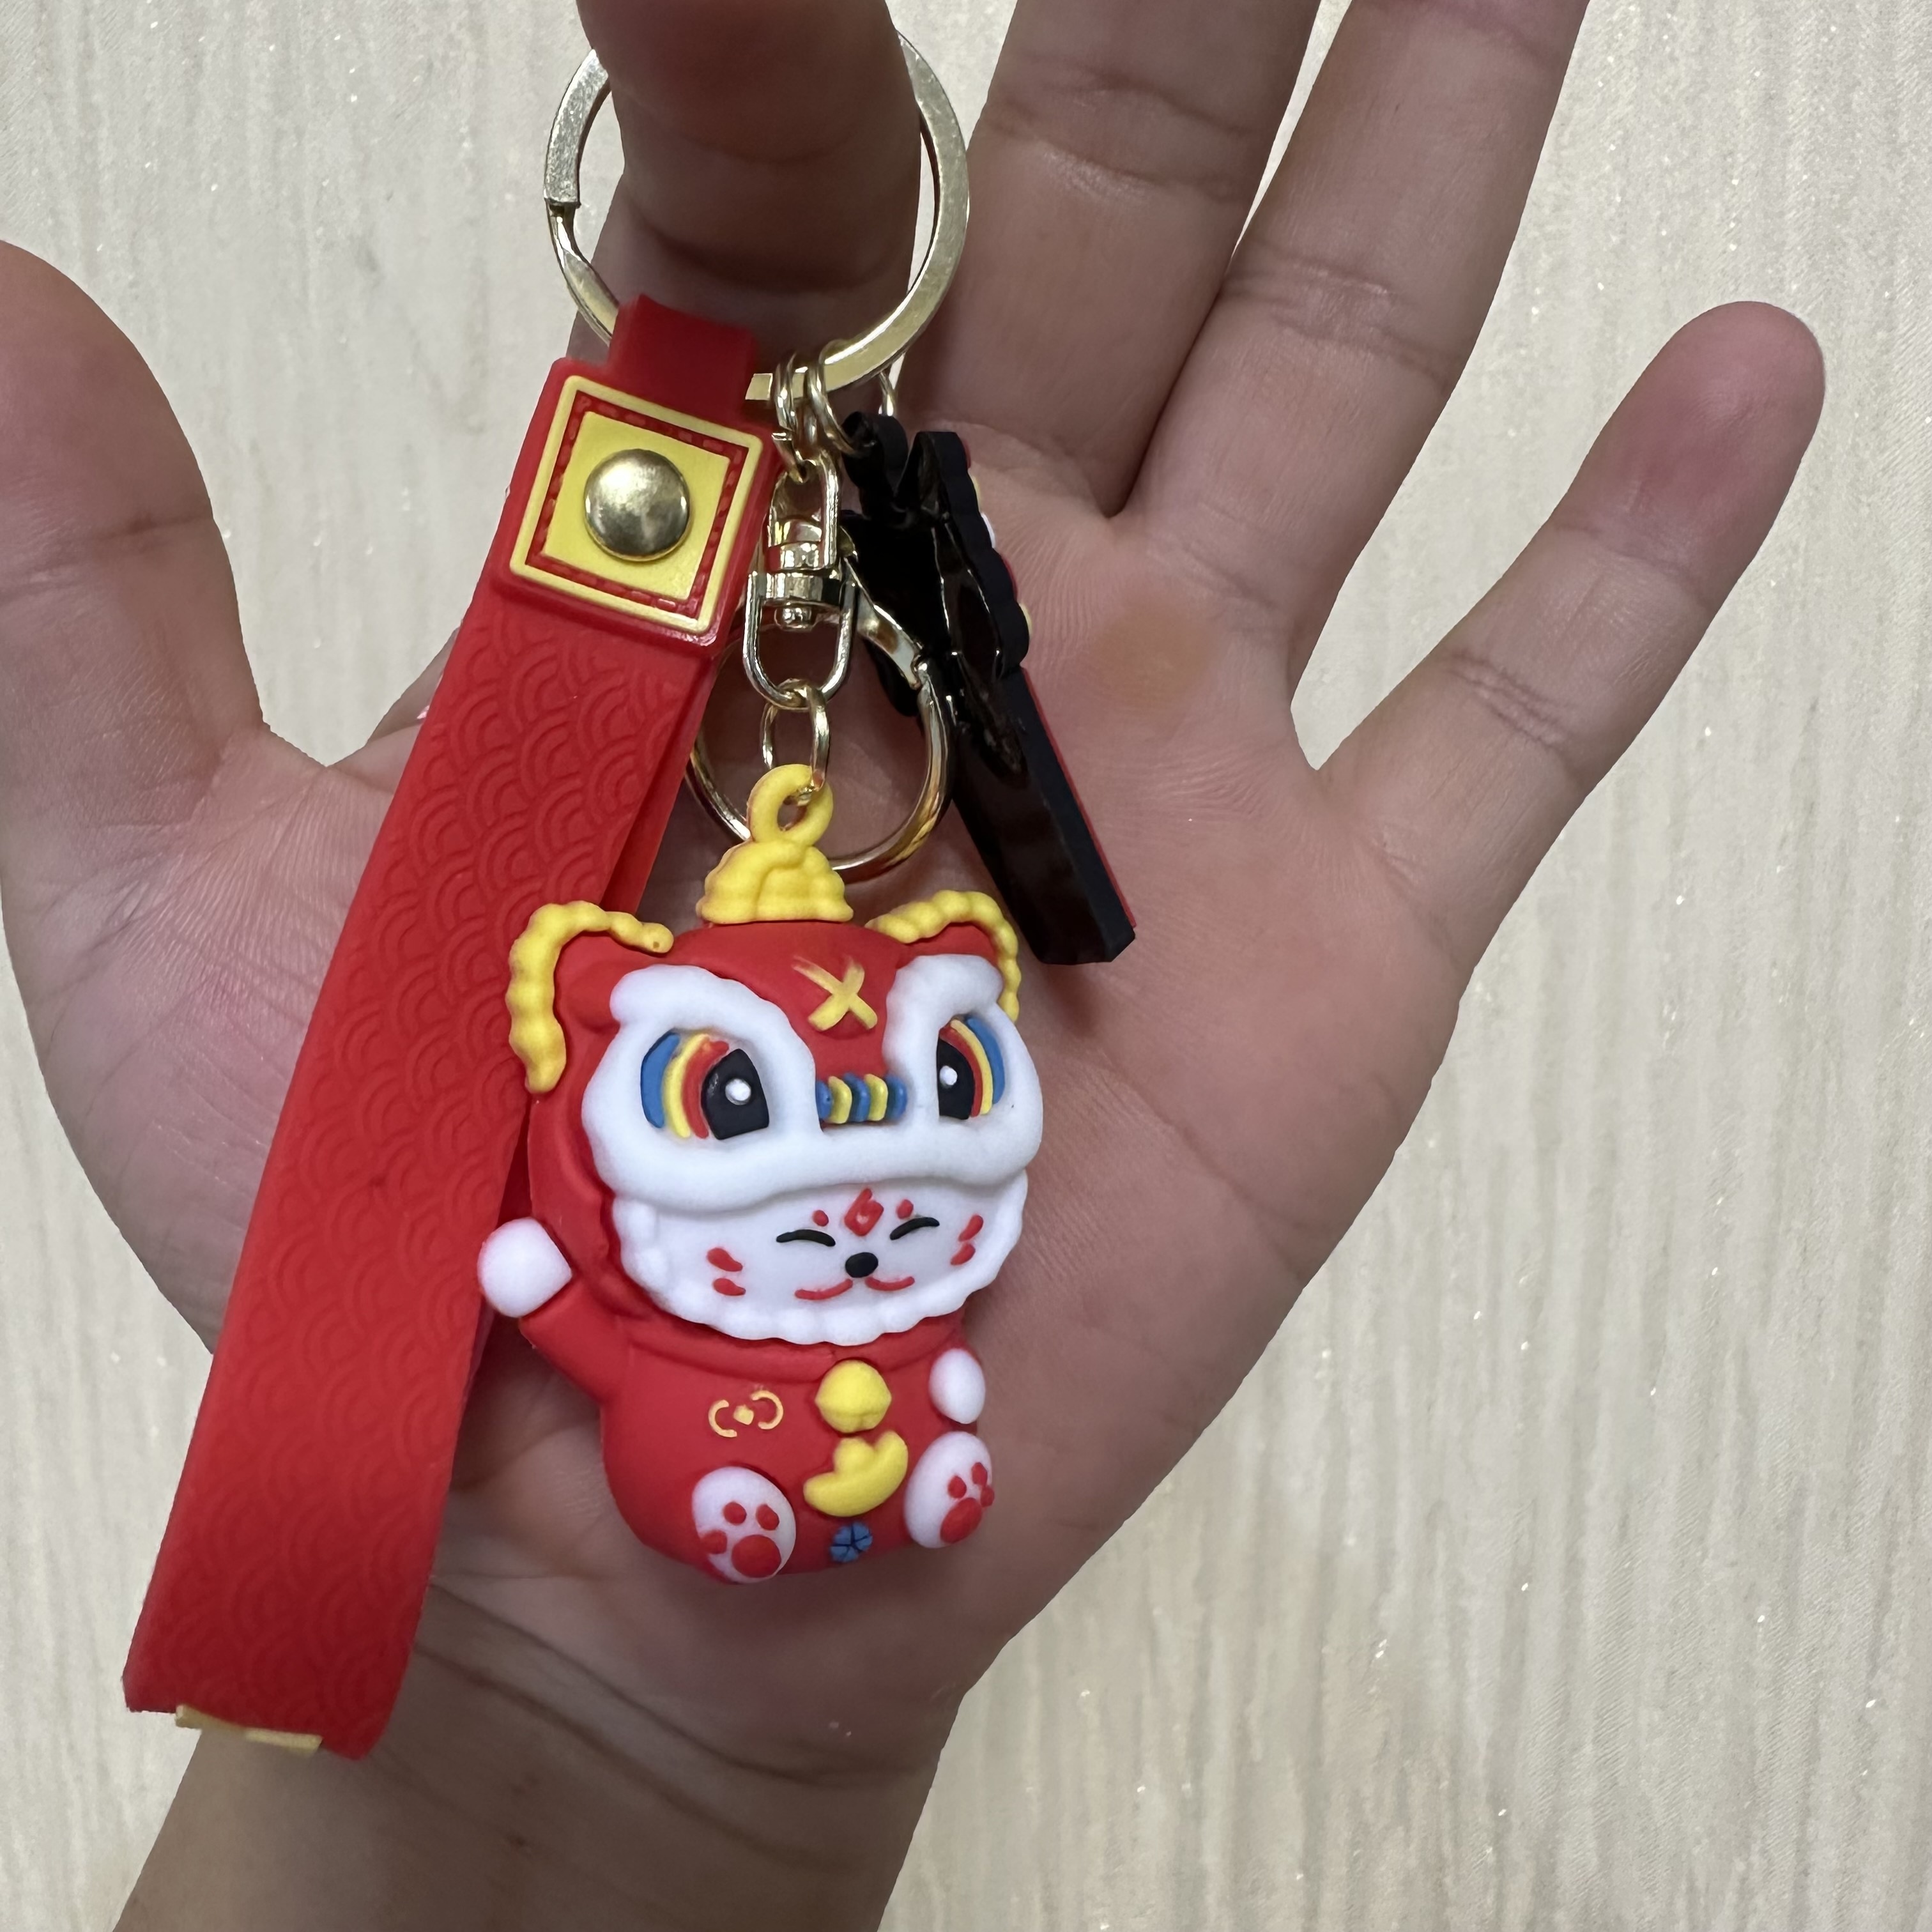 Luxury Pu Leather Key Chain Creative Trend Cute Lucky Tiger